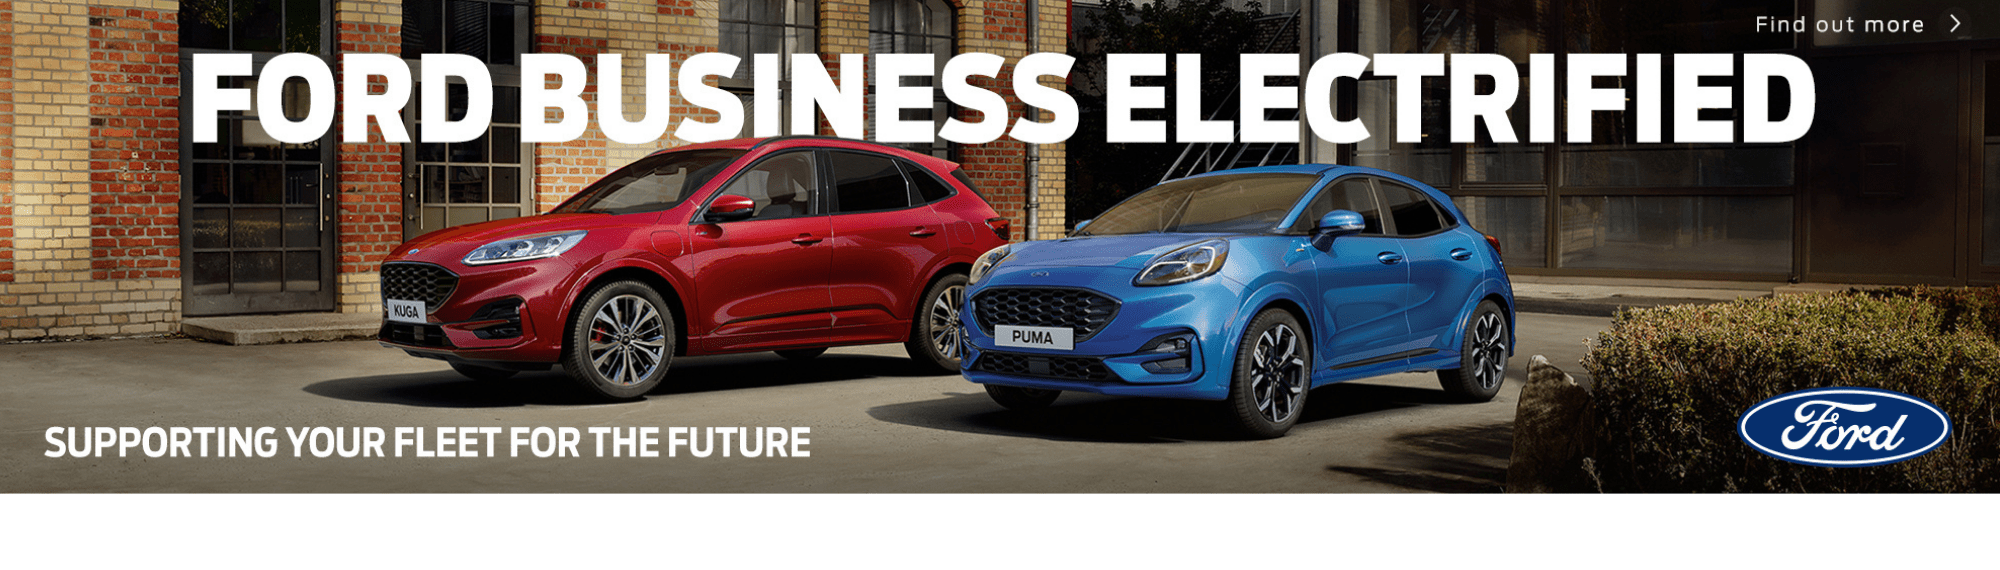 Ford Business Electrified Image